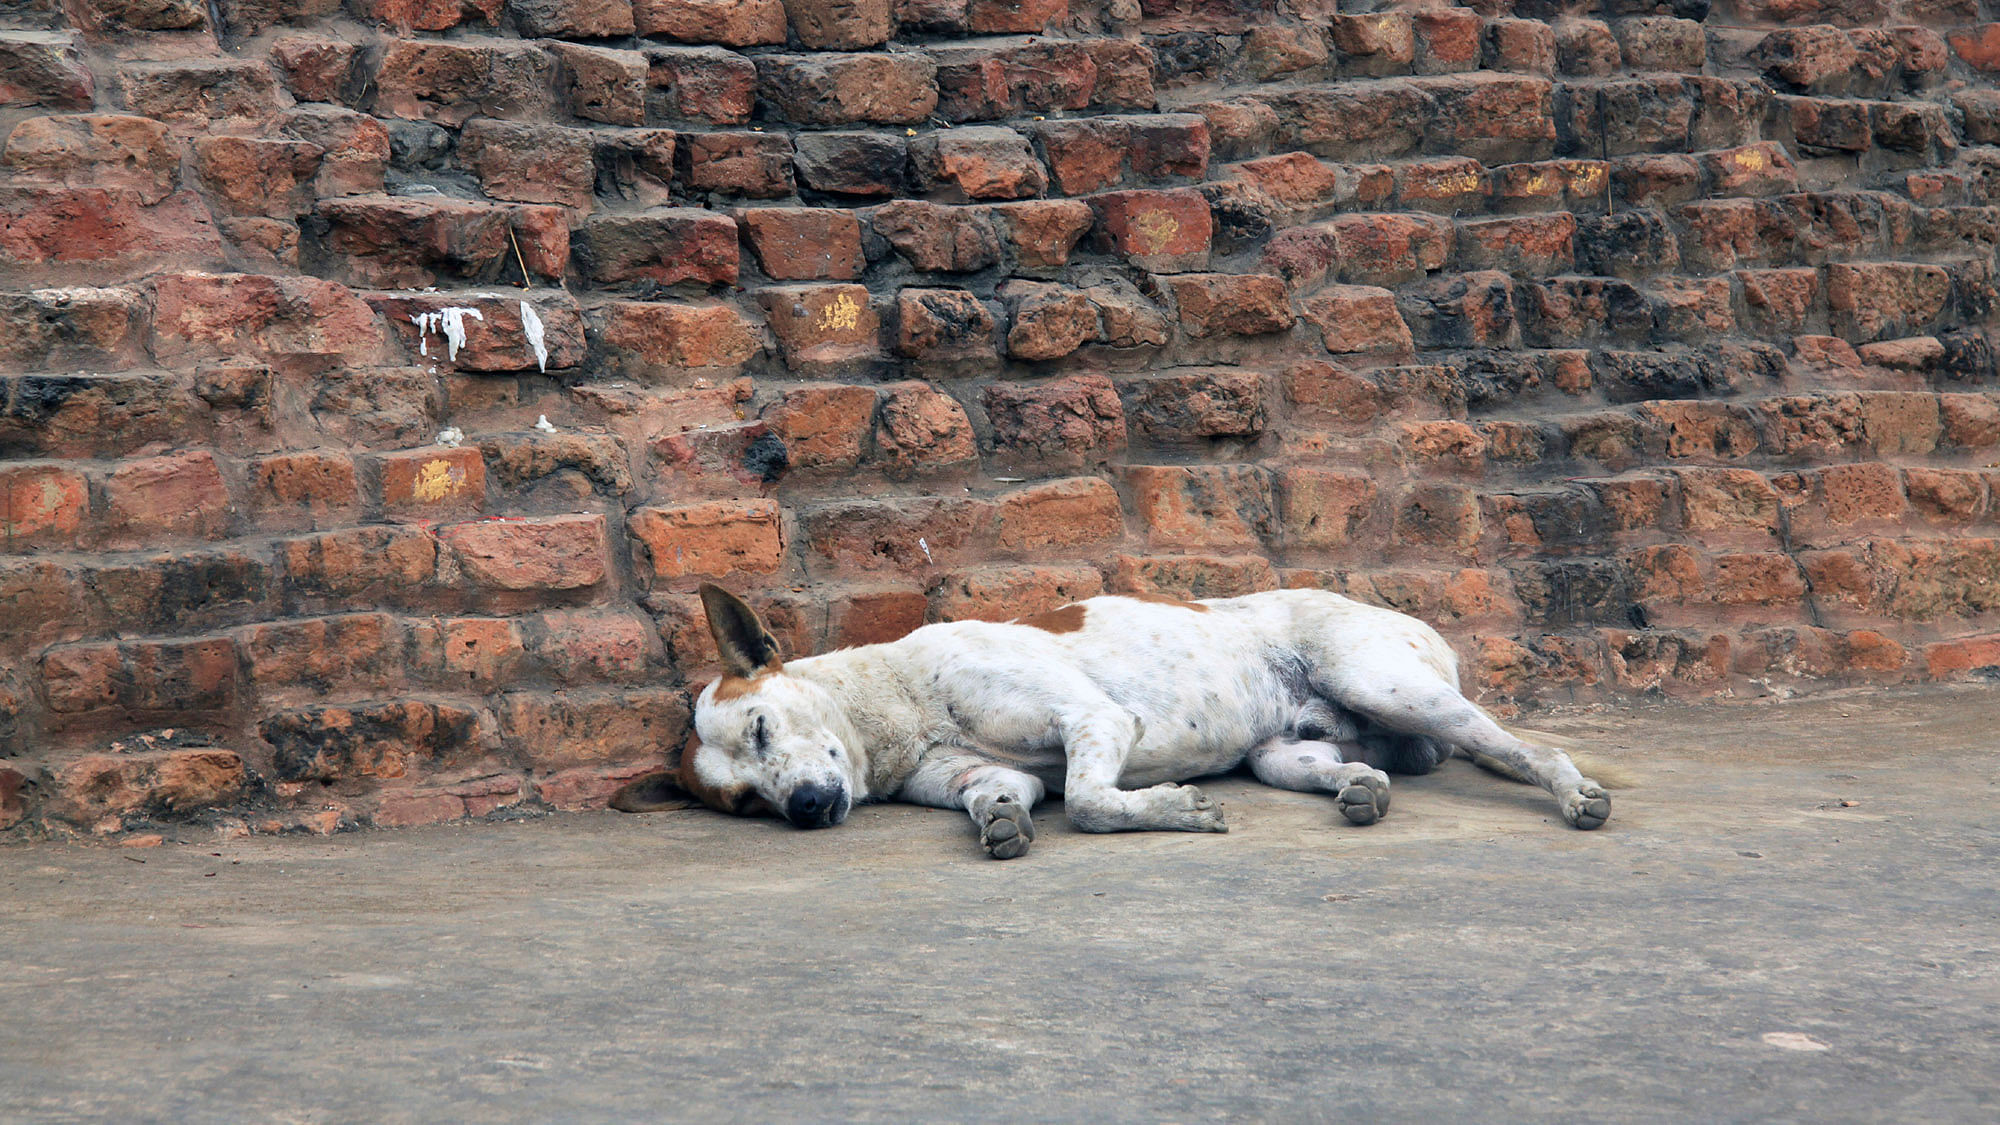 The sterilisation and anti-rabies vaccination drive cost Rs 5,000 per dog. (Photo: iStockphoto)